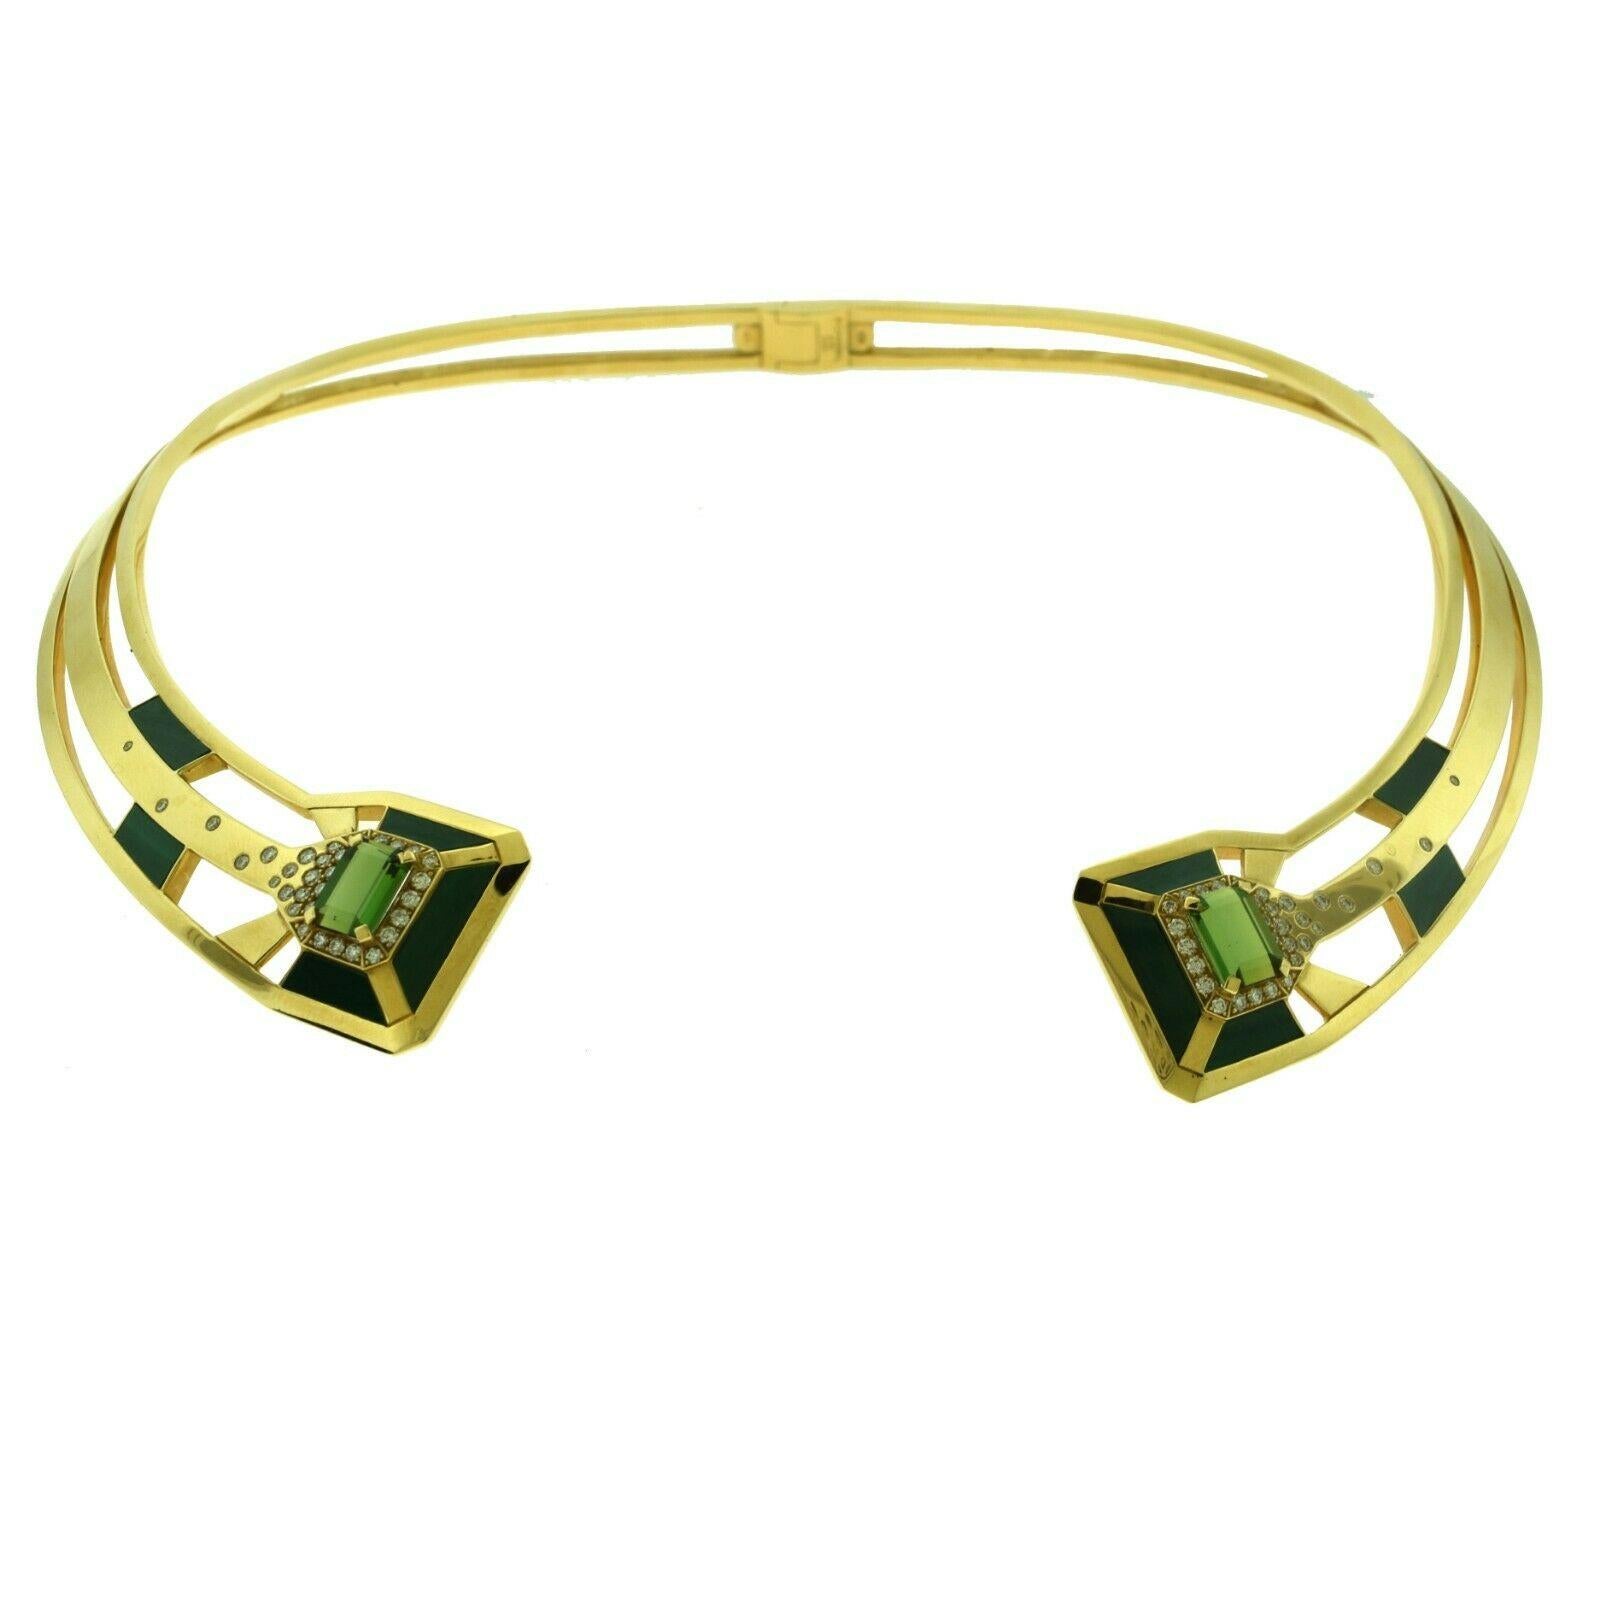 Brilliance Jewels, Miami
Questions? Call Us Anytime!
786,482,8100

Designer: Chanel

Collection: Gallery Collection, My Green Jewelry

Metal: 18k Yellow Gold

Stones : Brilliant Round Diamonds 

                Malachite  

               